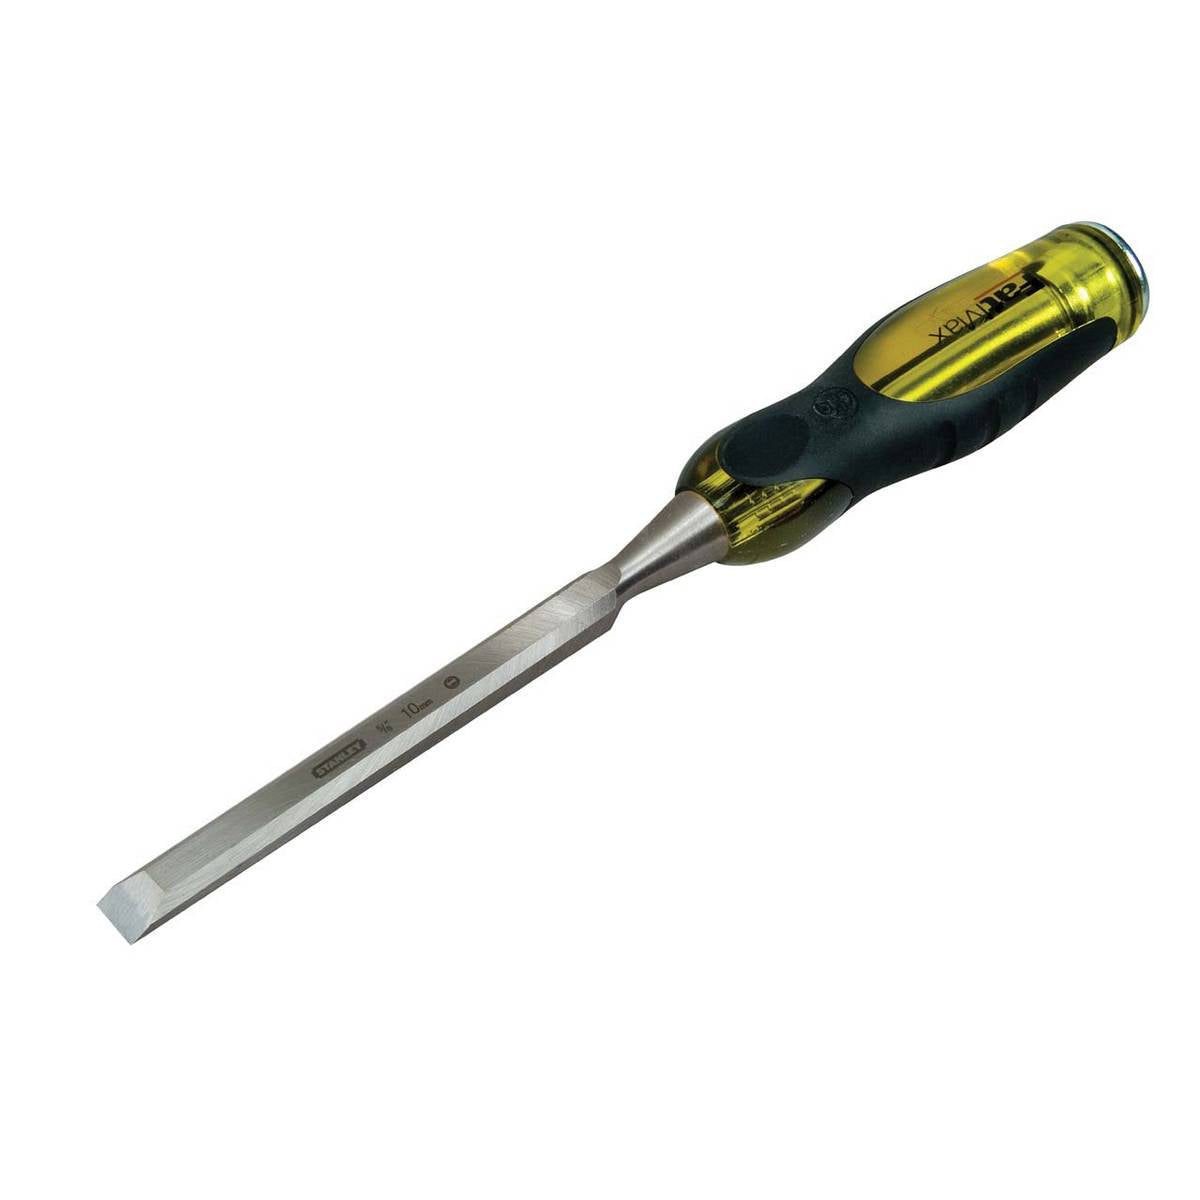 STANLEY ® FATMAX® BEVEL EDGE CHISEL WITH THRU TANG 6MM (1/4IN)